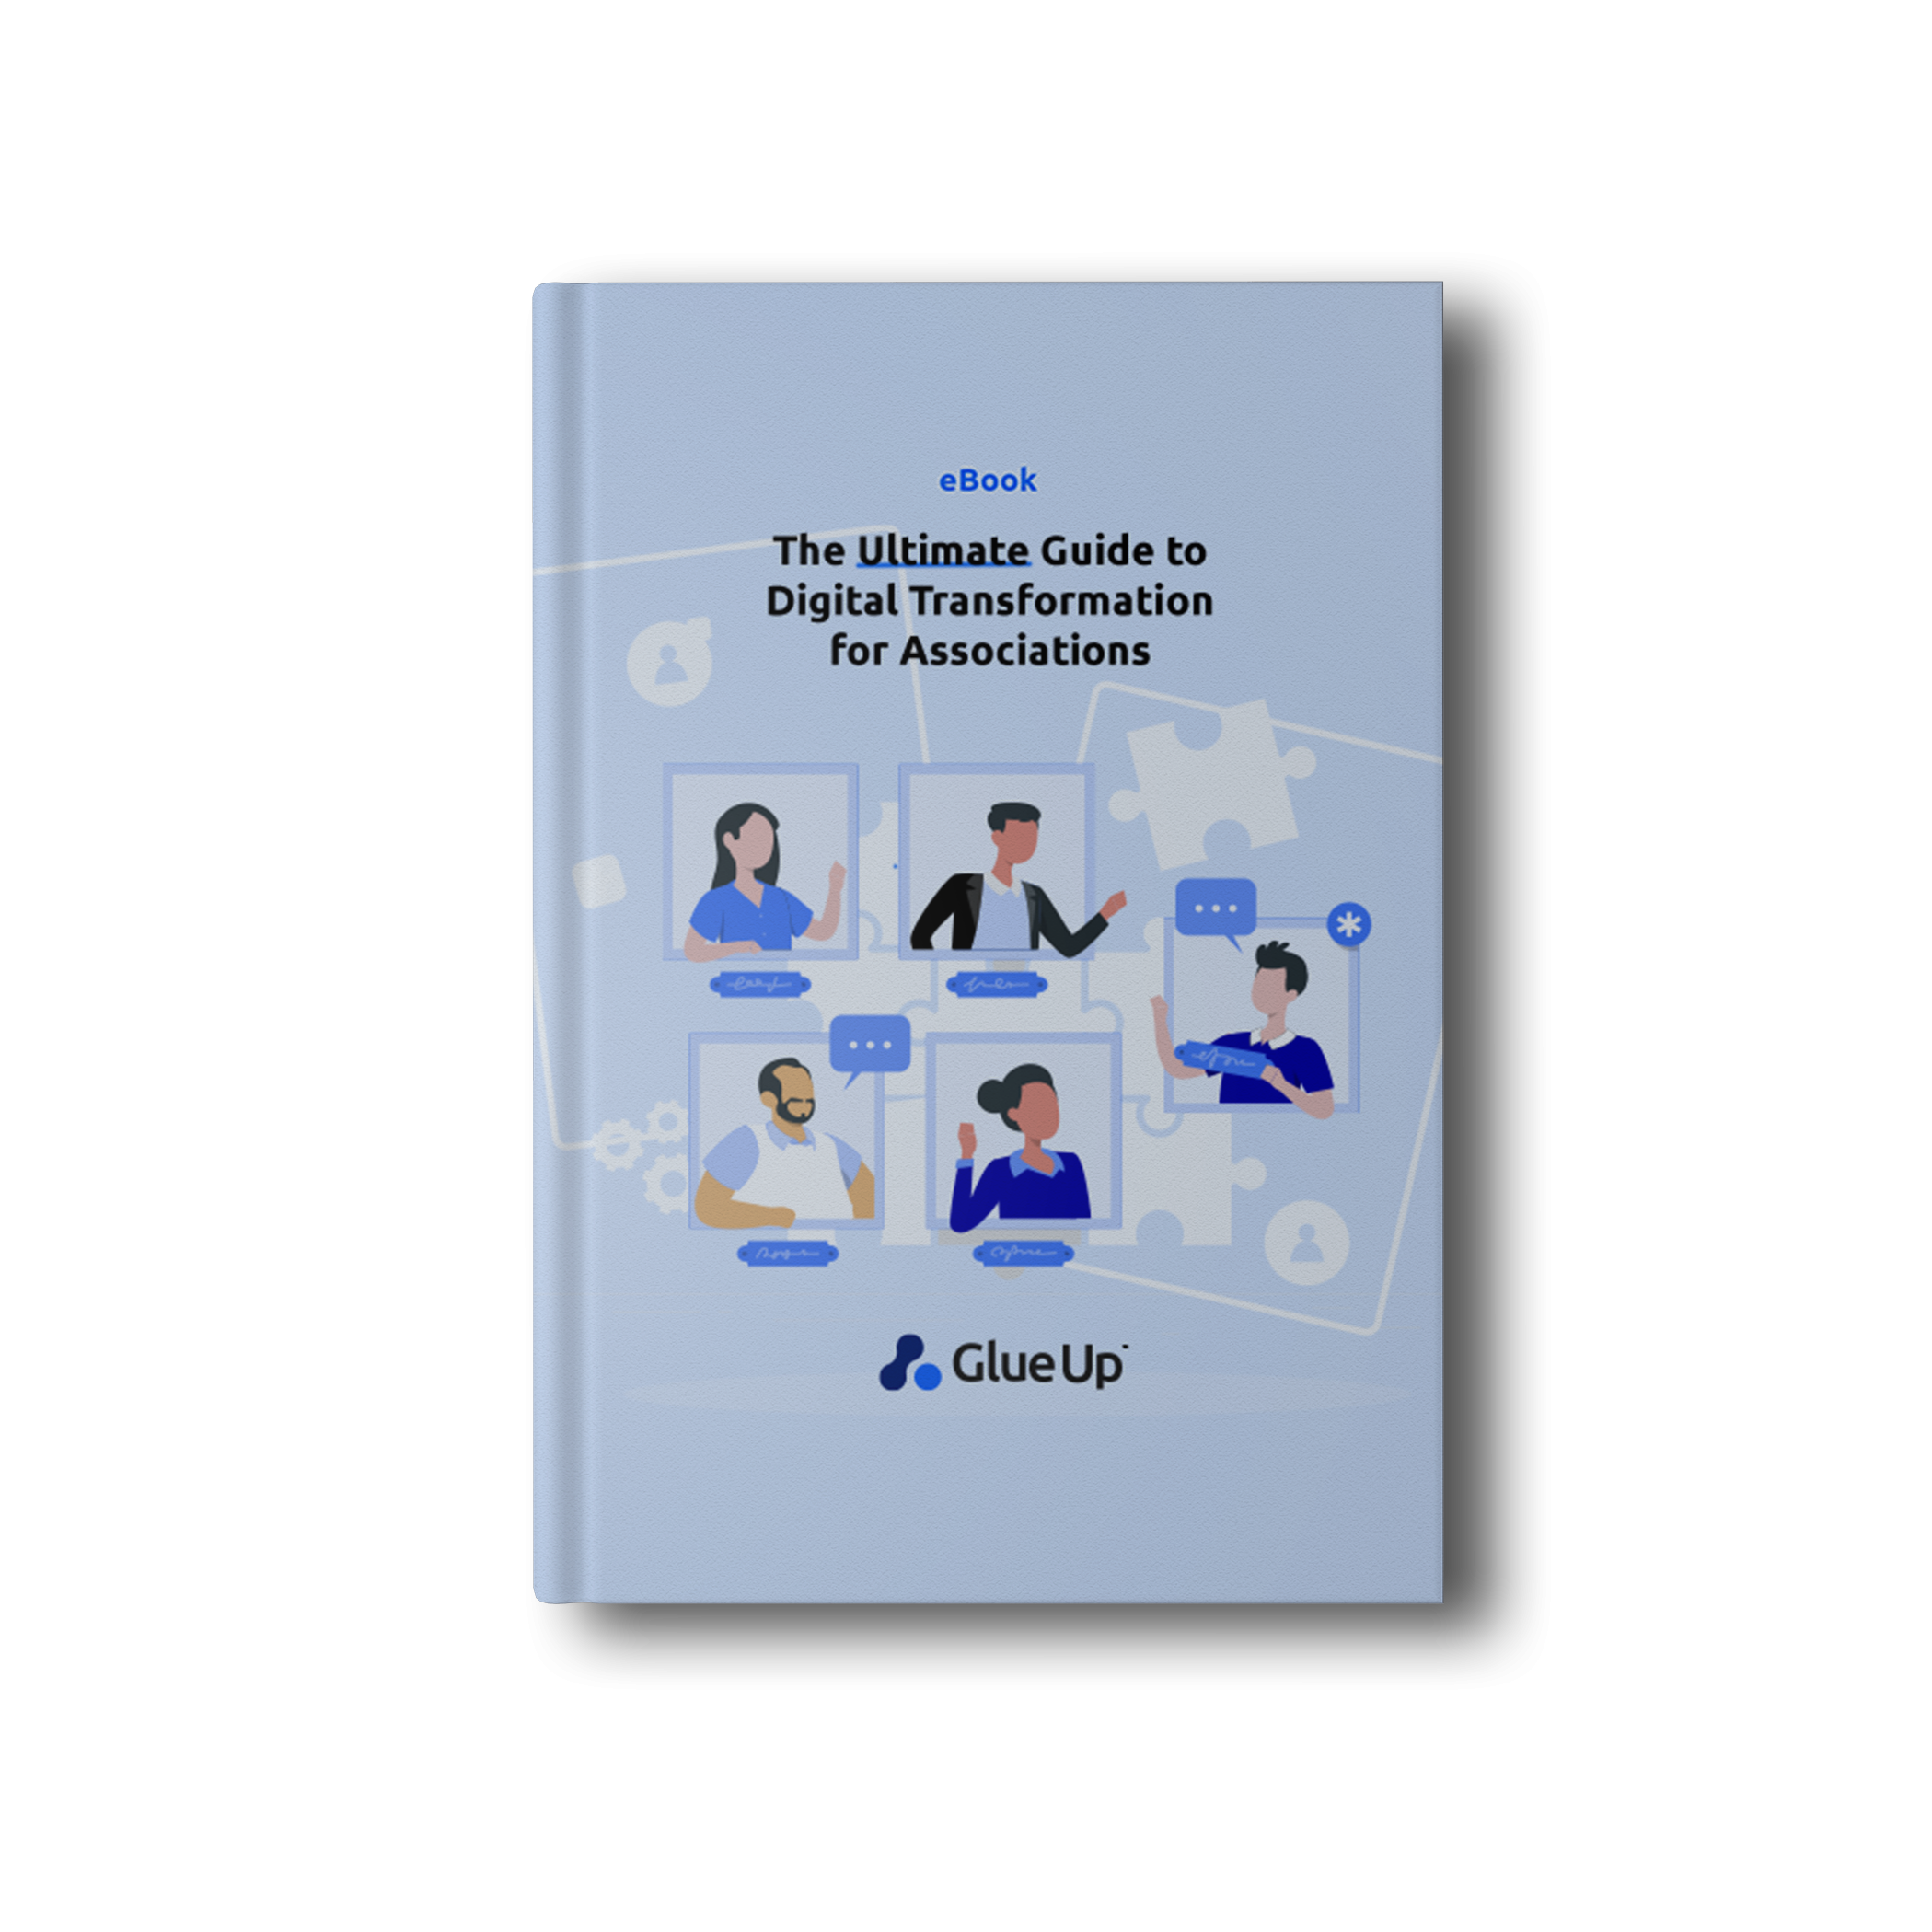 The Ultimate Guide to Digital Transformation for Associations